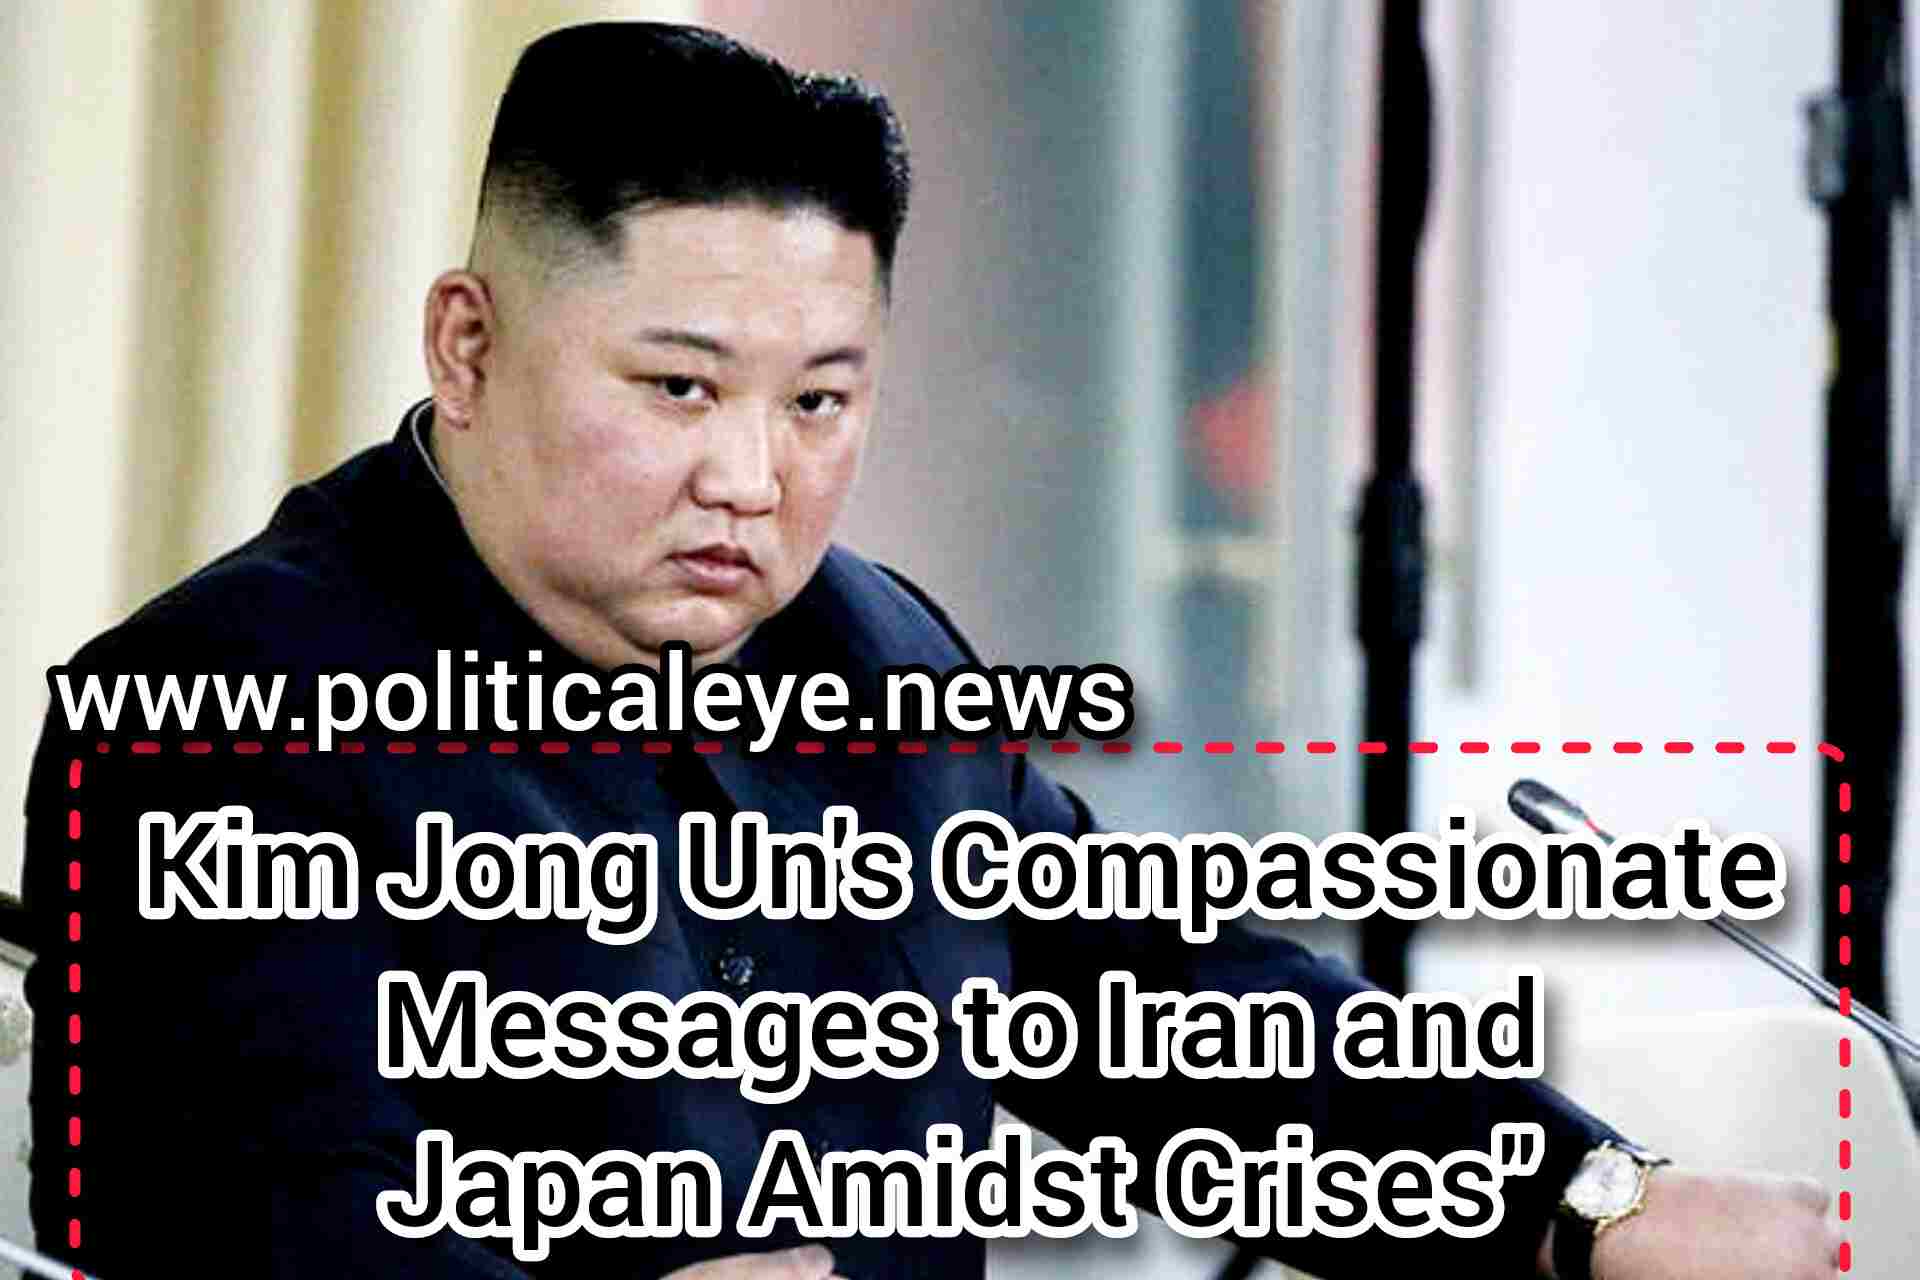 In a compassionate display of international solidarity, #NorthKorean leader #KimJongUn has reached out with heartfelt messages of sympathy to both Iran and Japan, two nations grappling with recent tragedies. Following .... Read more click here ⬇️